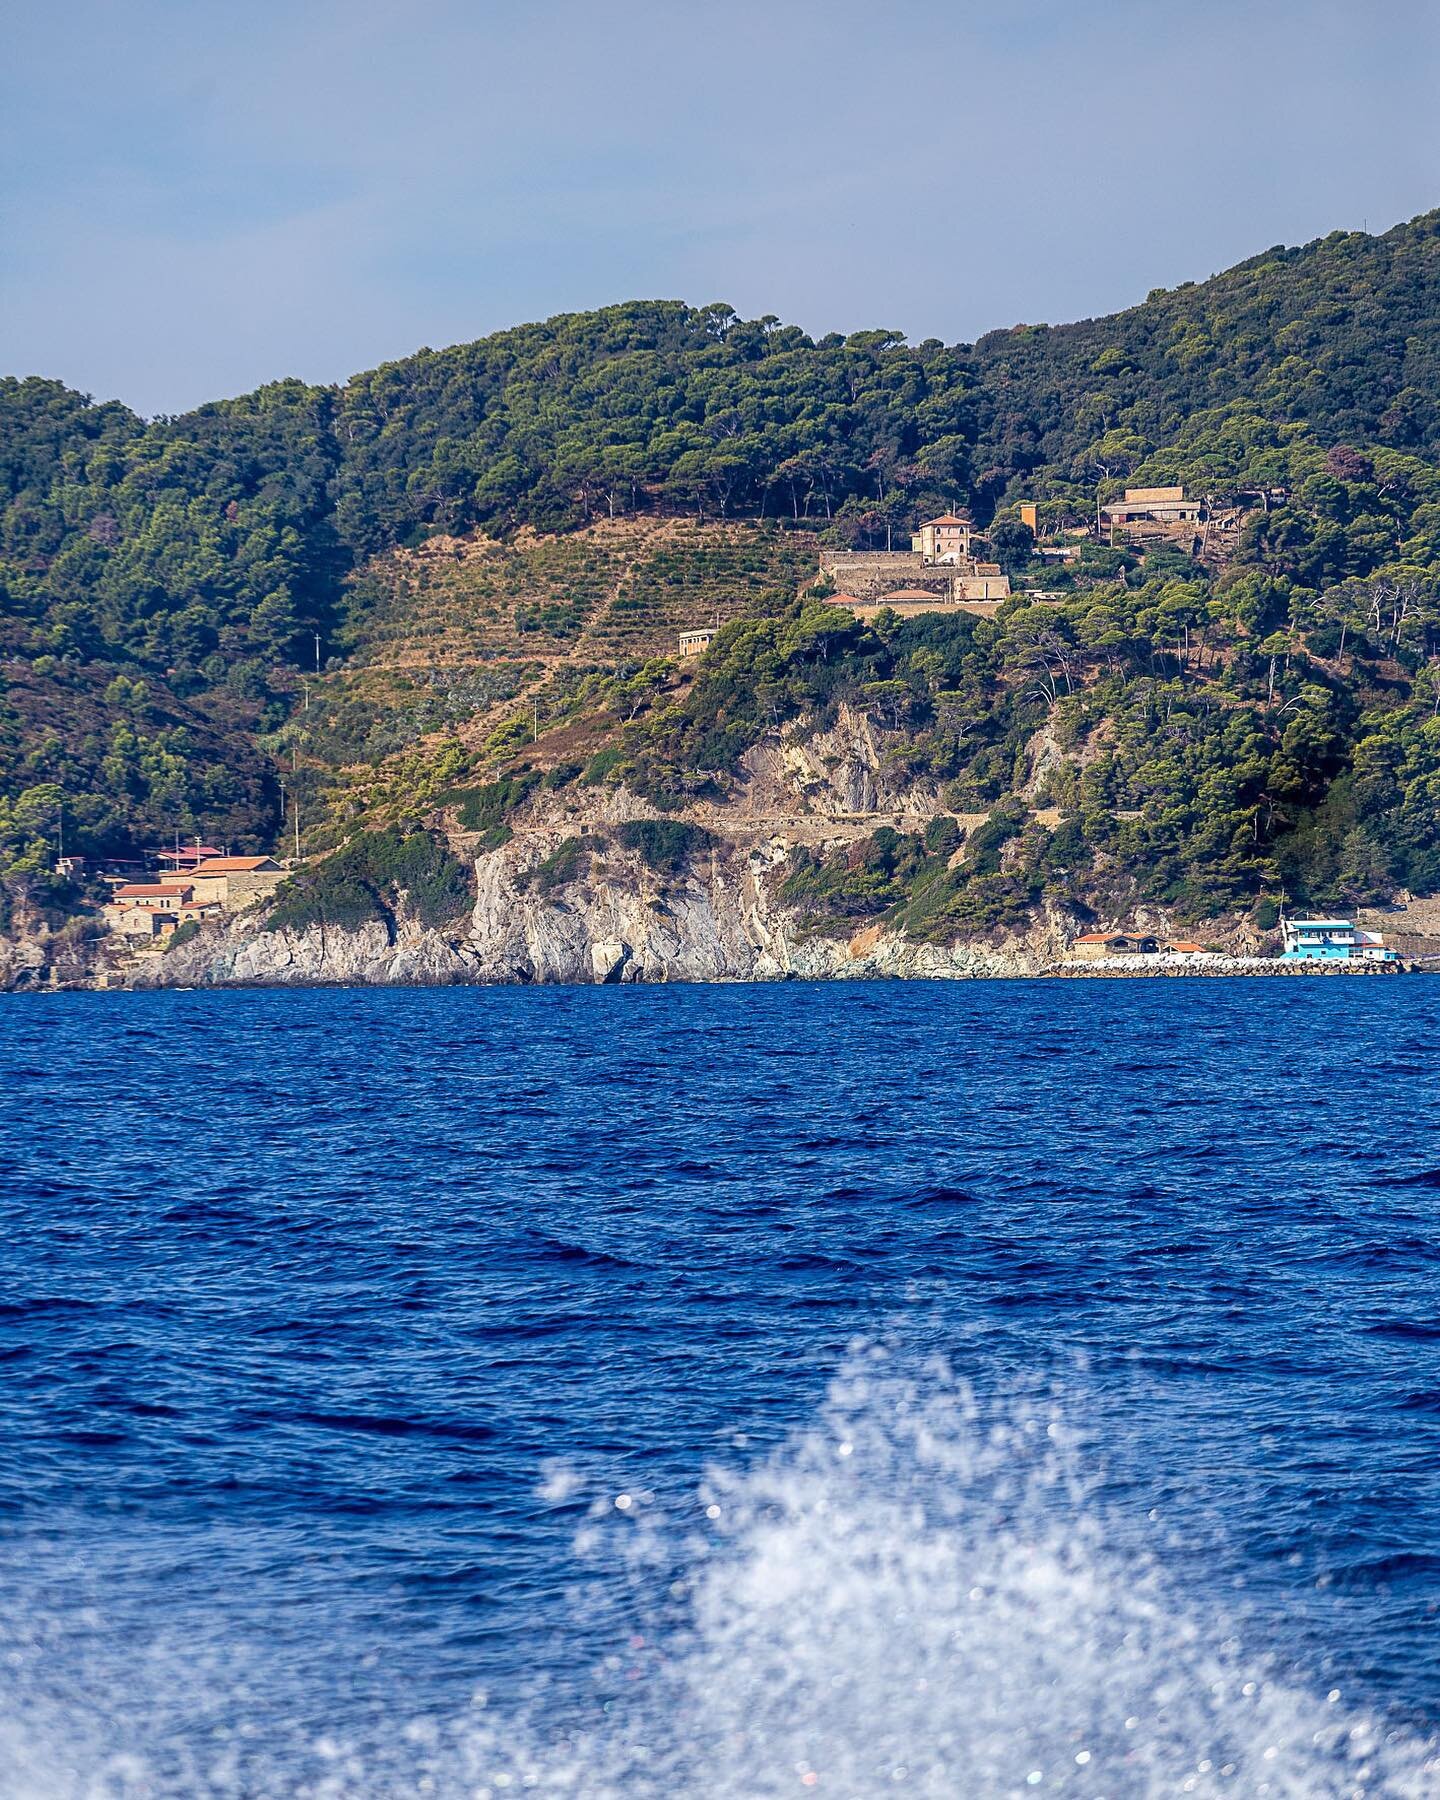 This is Gorgona. A prison island in the Tuscan archipelago where the inmates make a tasty kind of prison wine in collaboration with @frescobaldivini, while serving their last years of long sentences for serious crimes. It is a beautiful place and a h